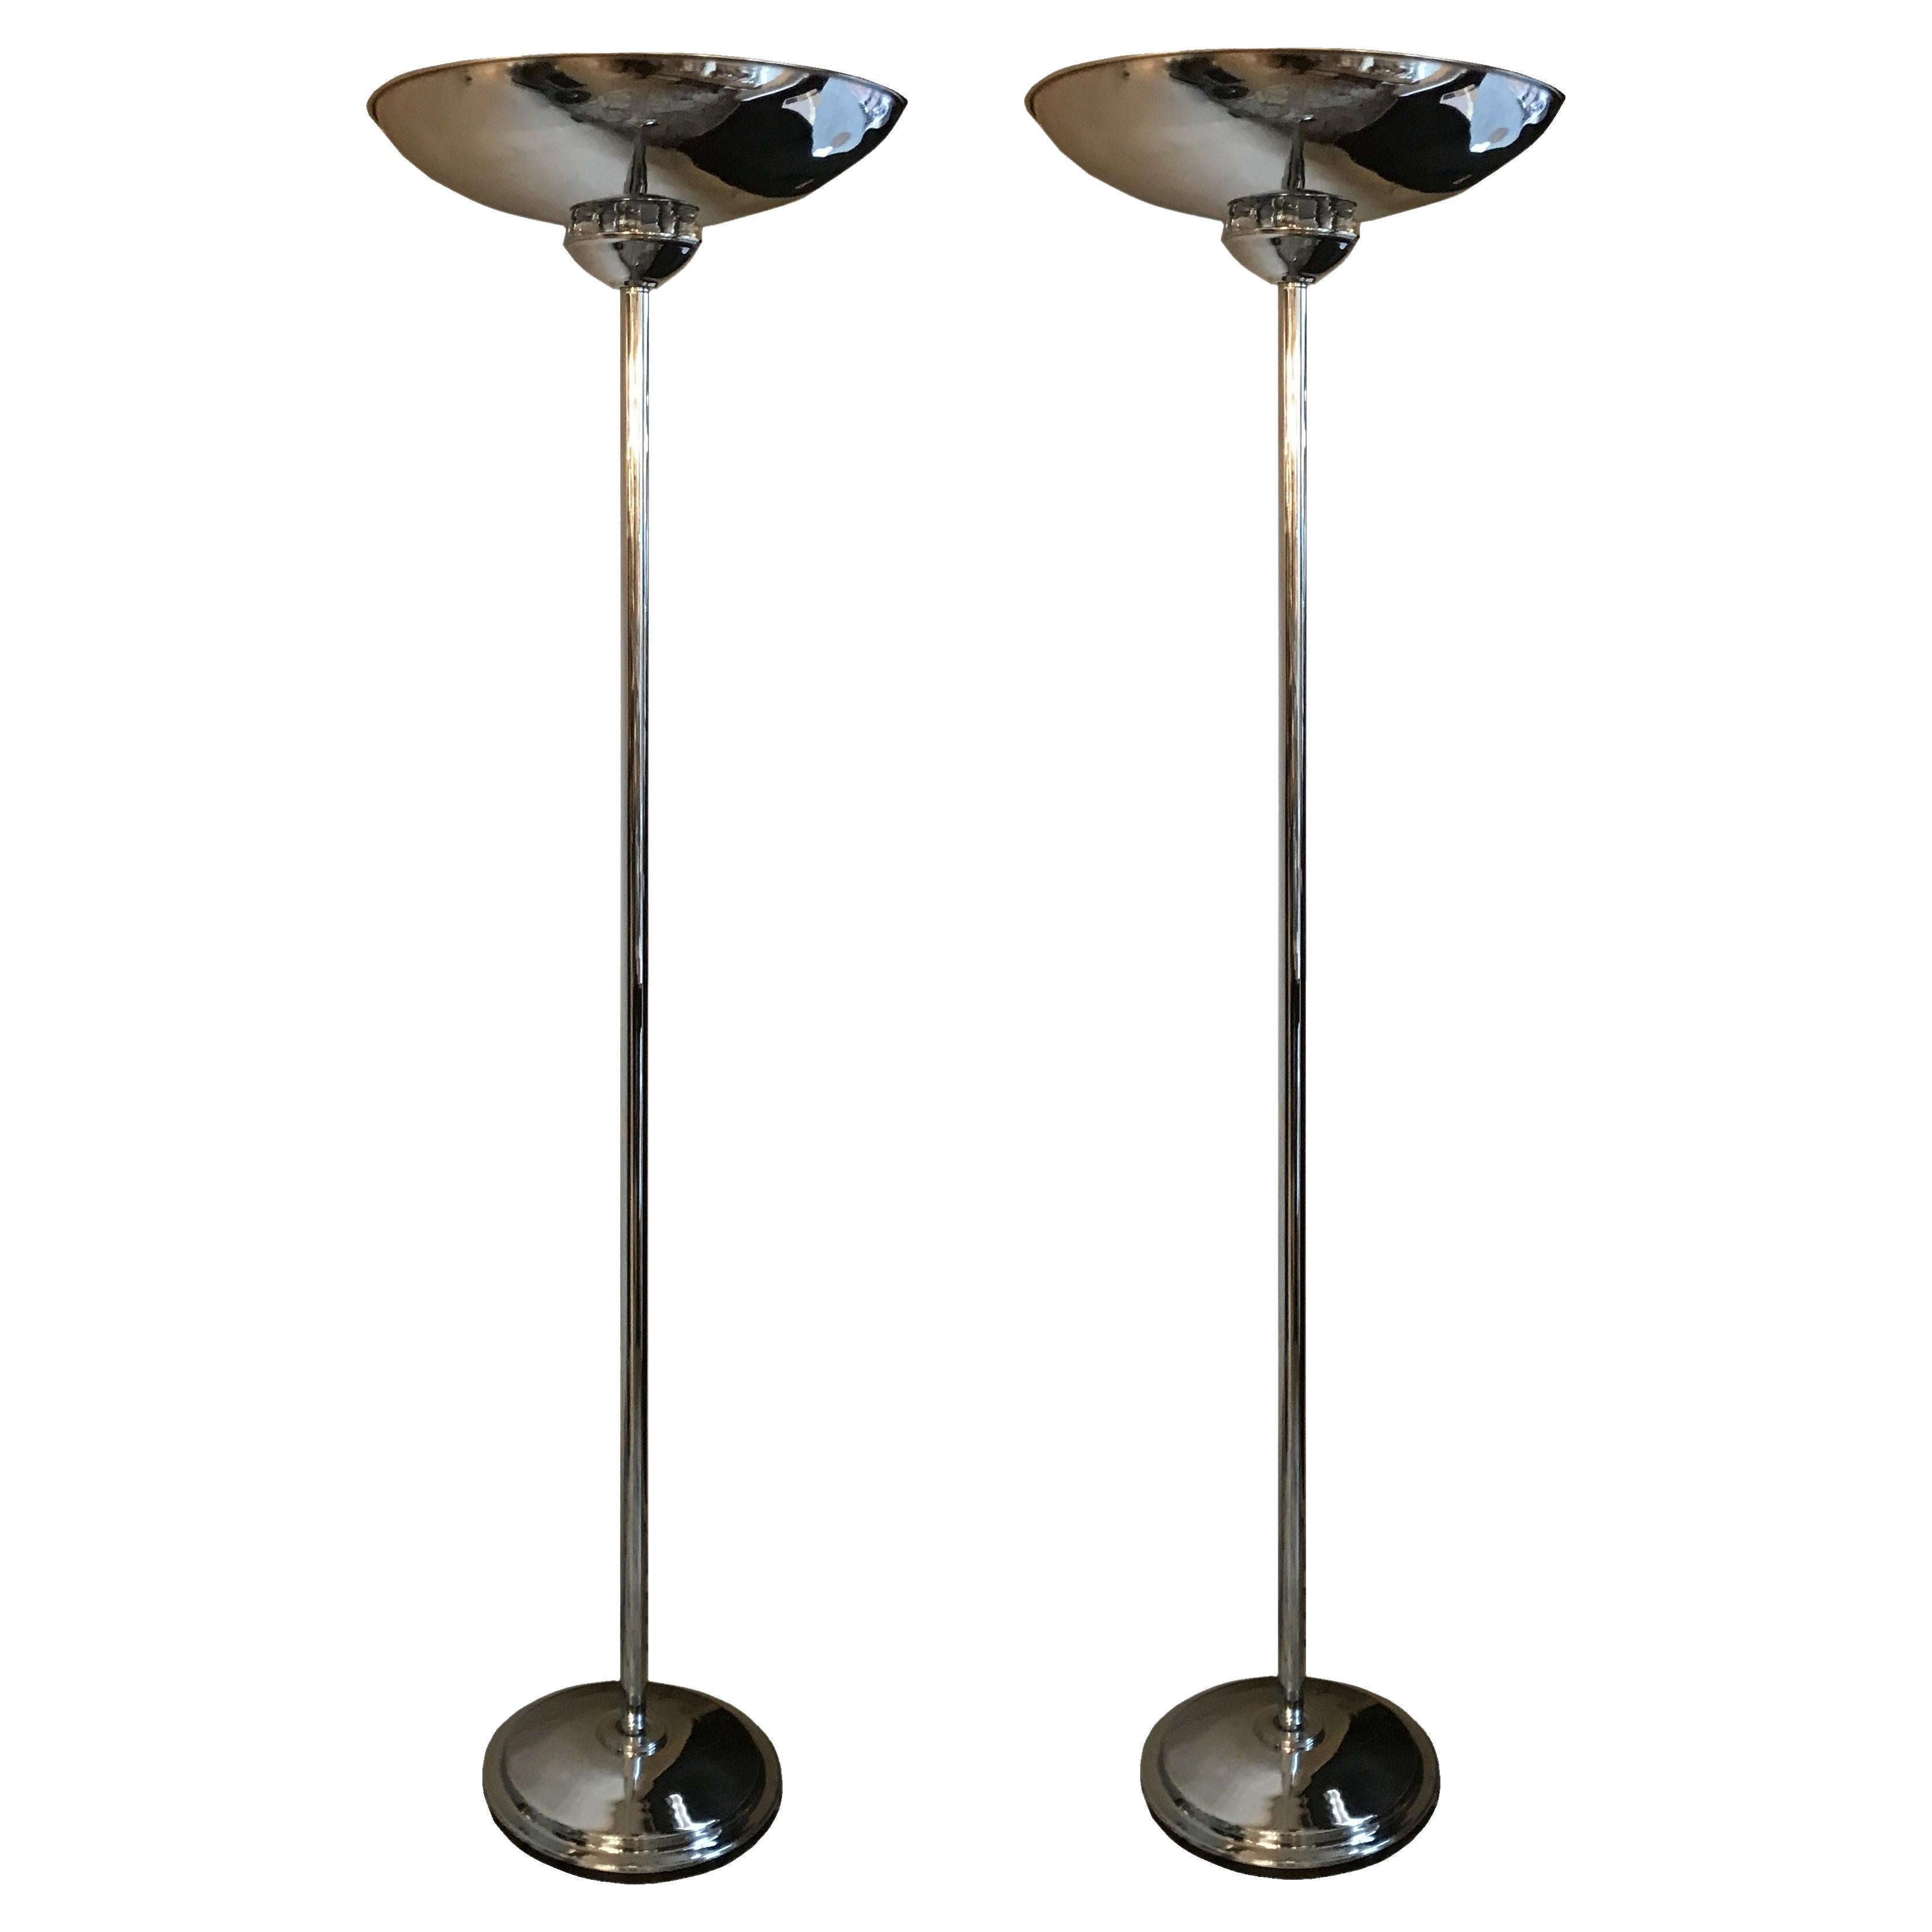 2 Art Deco Floor Lamps, France, Materials: Glass and Chrome, 1930